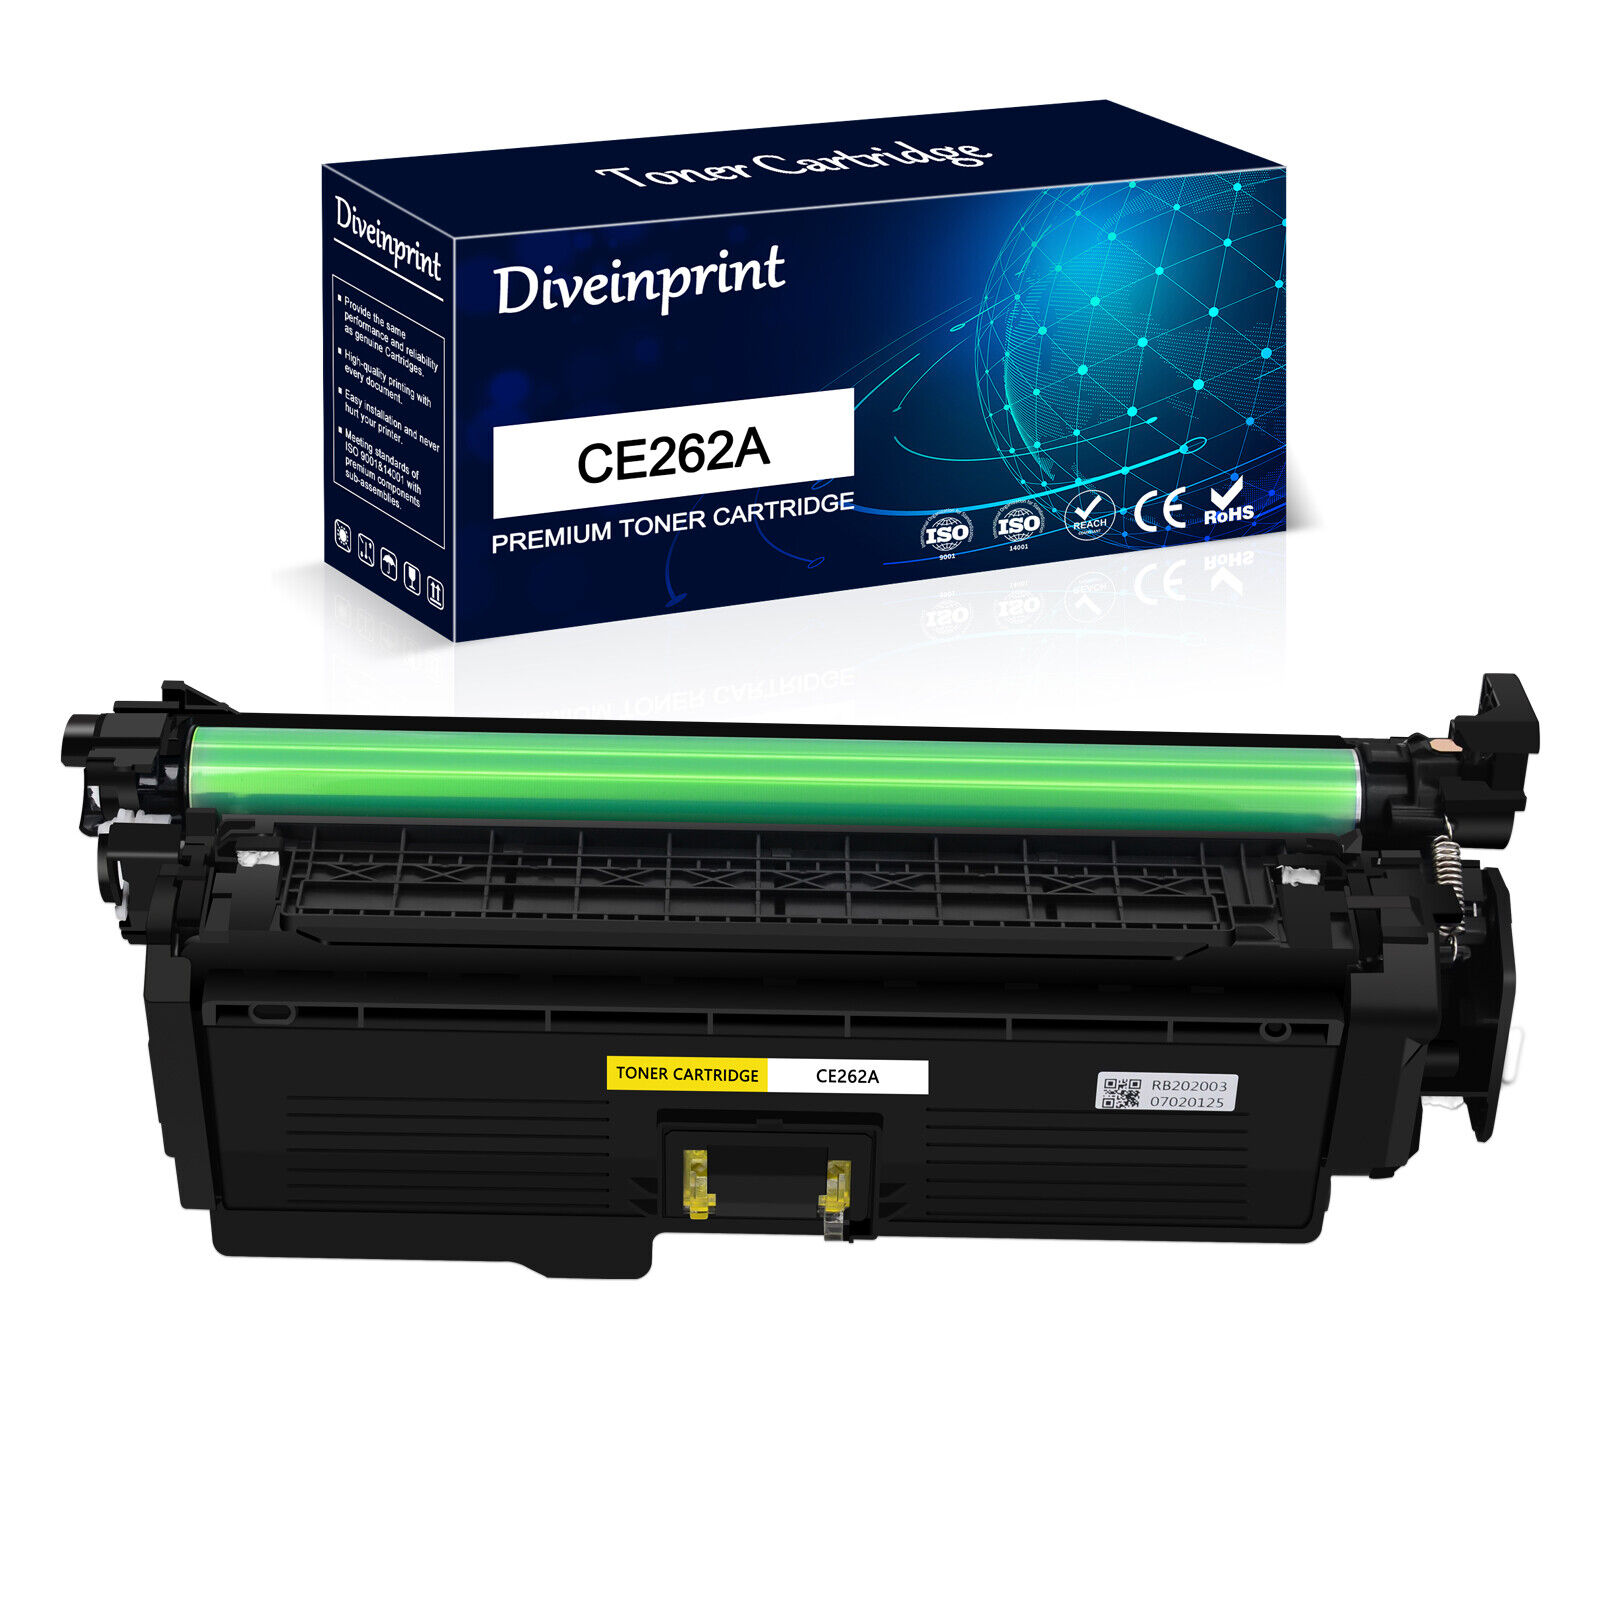 1-4PK CE262A 647A Yellow Toner Cartridge for HP Color LaserJet CP4025 CP4525